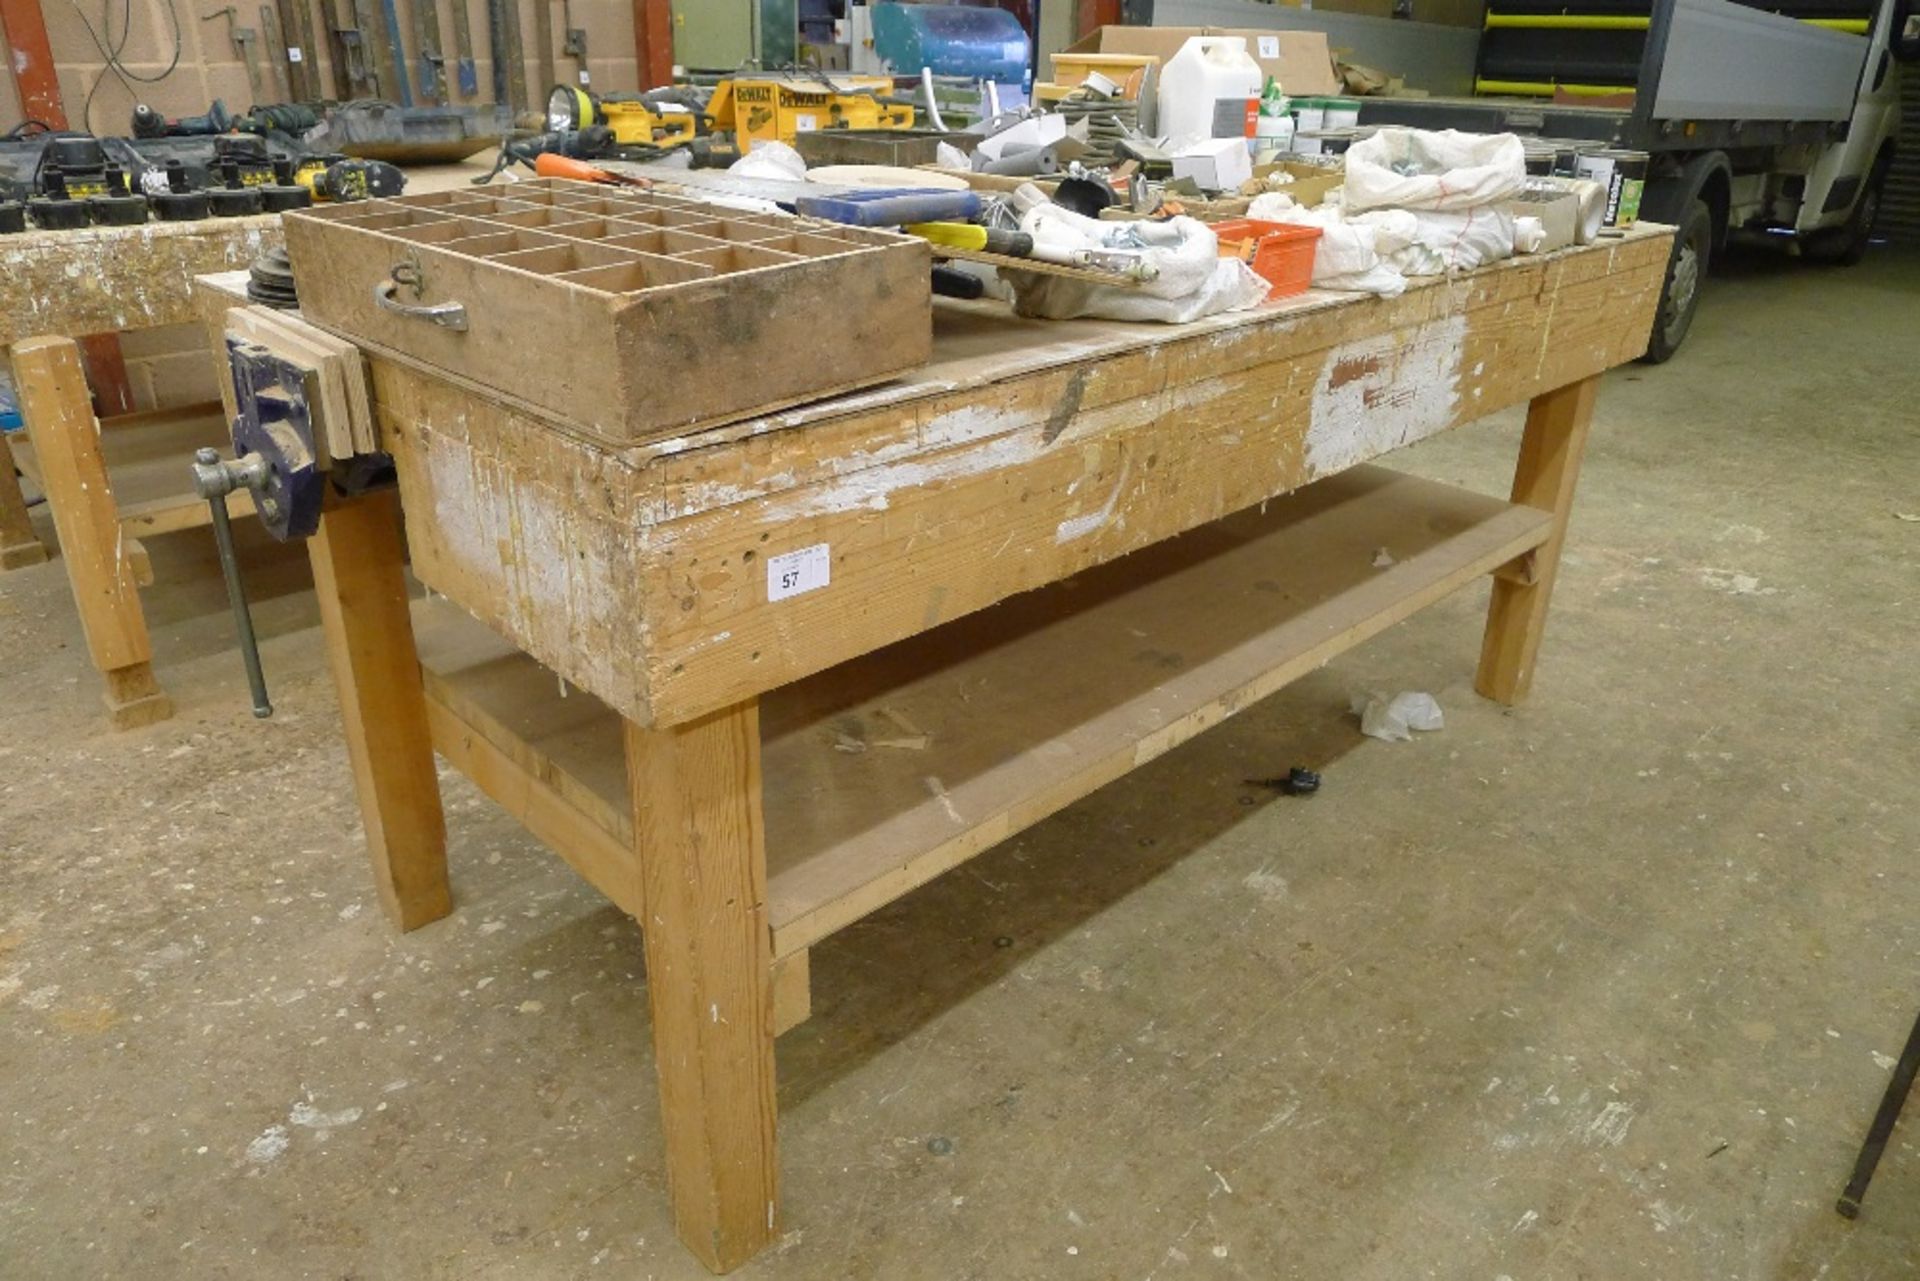 1 wooden work bench with a wood workers vice fitted, approx 2.14m x 1m